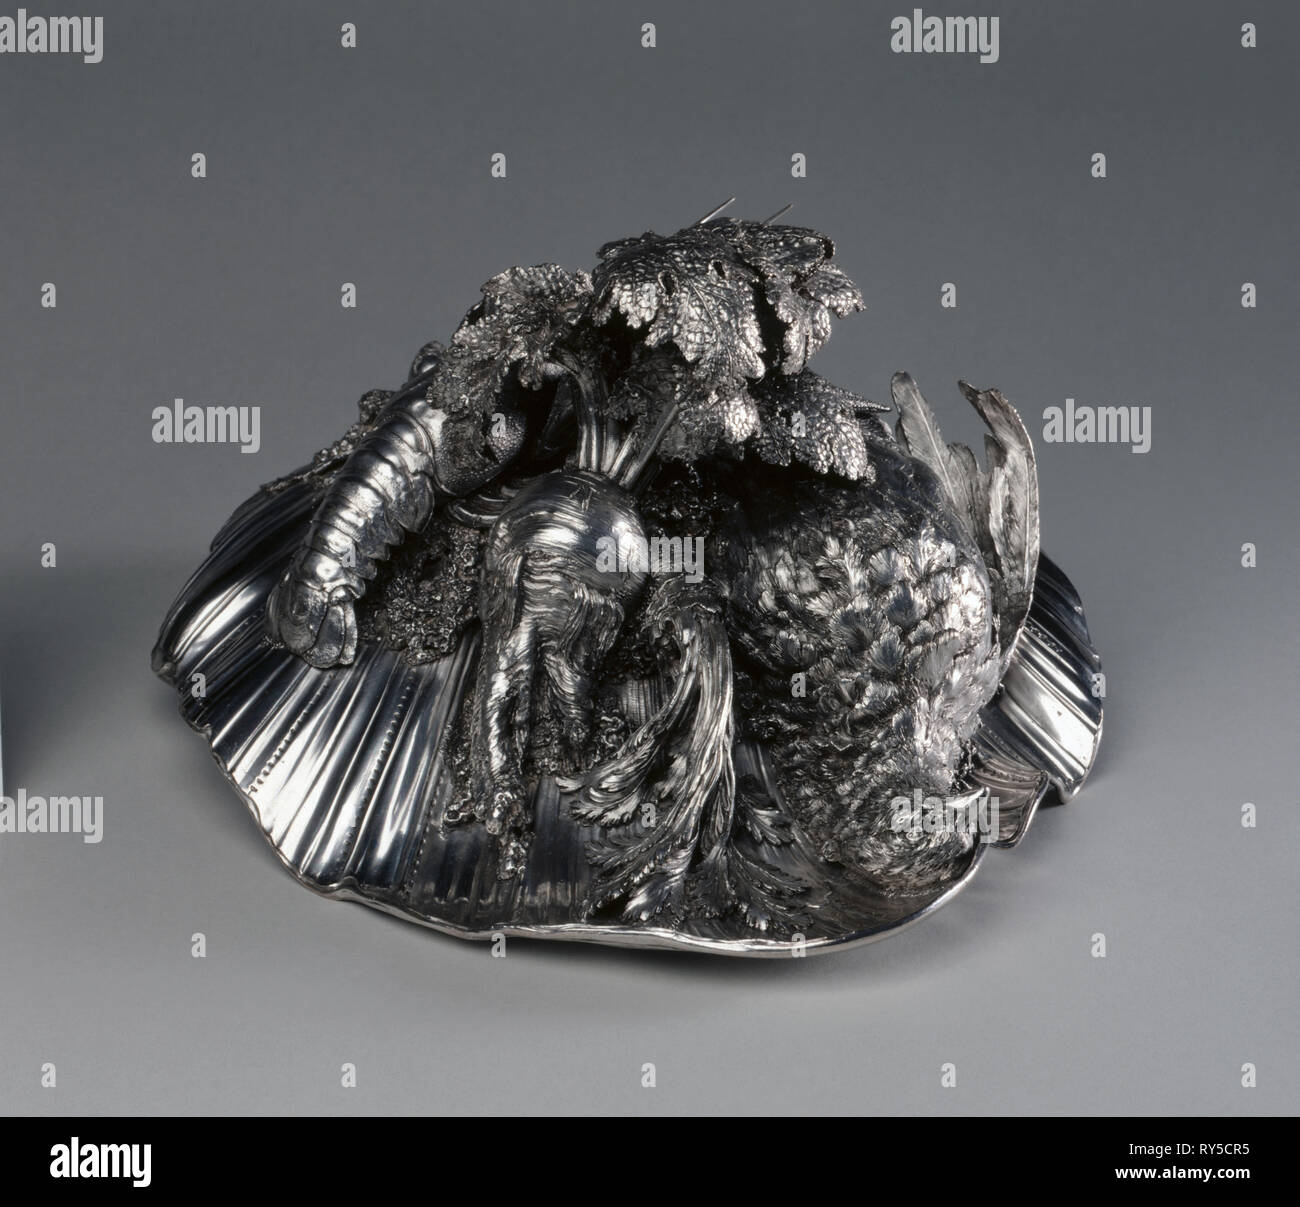 Tureen (lid), 1735-1738. Henry Adnet (French, 1745), Juste-Aurèle Meissonnier (French, 1695-1750). Silver; overall: 36.9 cm (14 1/2 in.); average: 35 x 38.4 x 31.8 cm (13 3/4 x 15 1/8 x 12 1/2 in Stock Photo